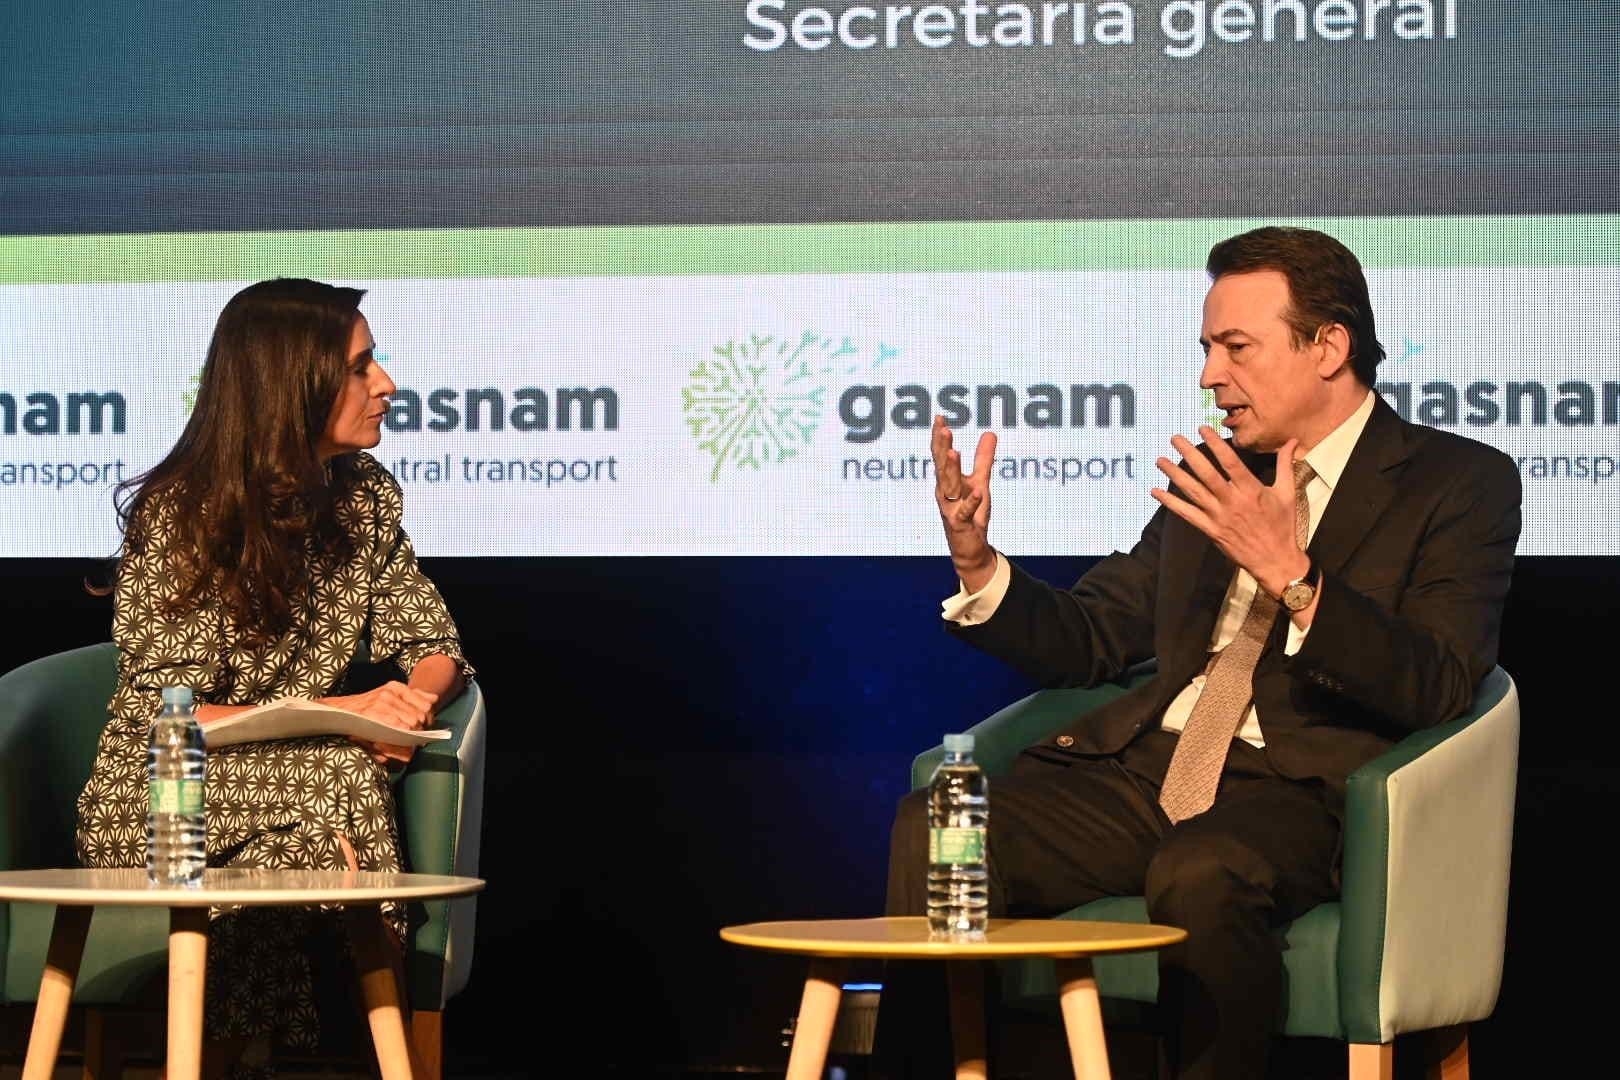 Enagás CEO during his intervention at an event